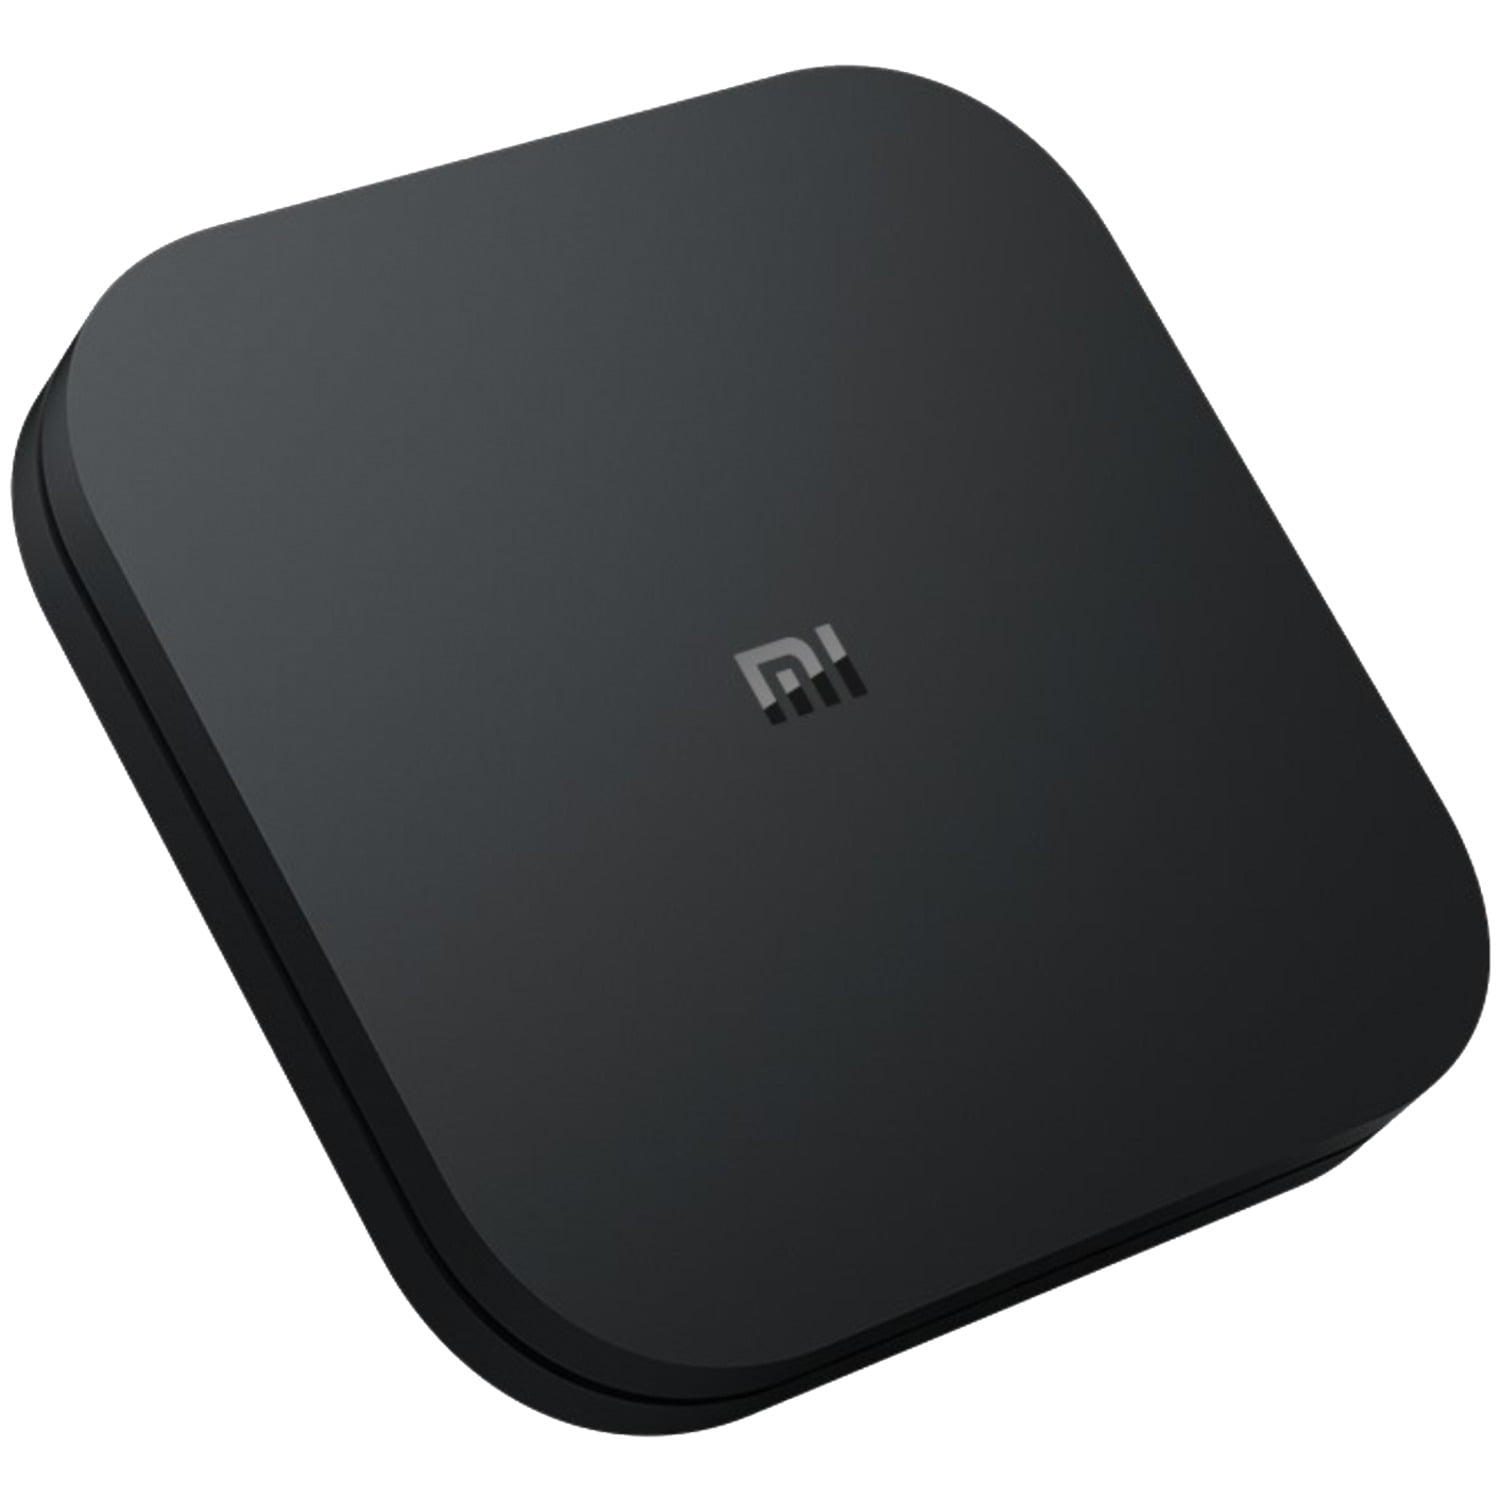 Xiaomi Mi Box S 4K HDR Android TV with Google Assistant Remote Streami – PC  Part Source Inc.